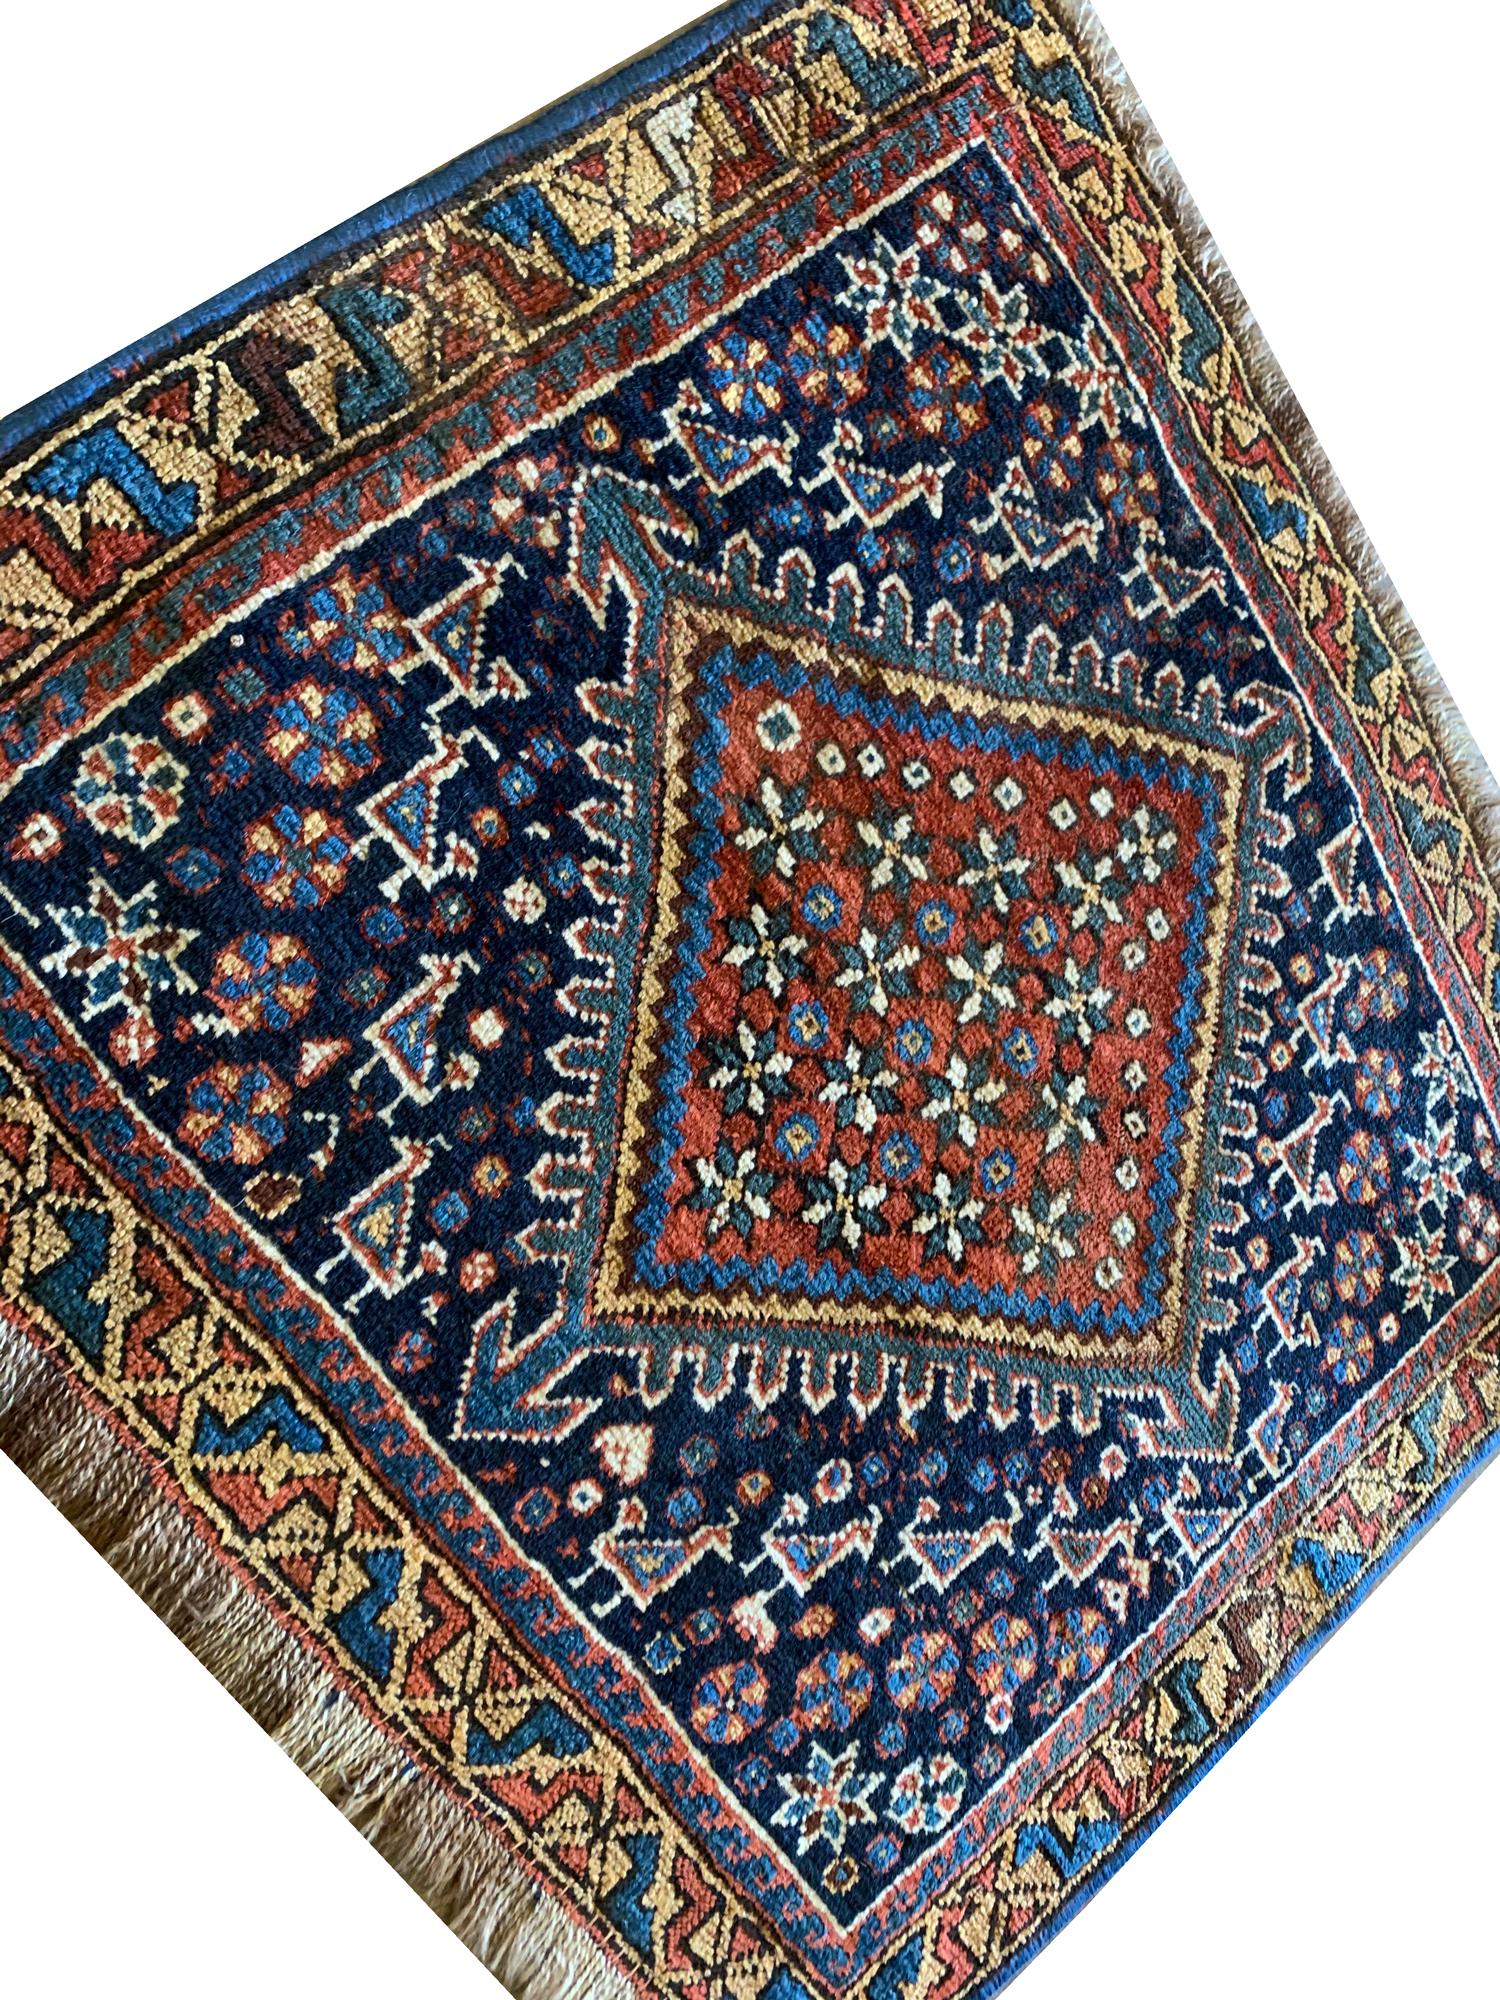 Tribal Antique Rugs Blue Caucasian Rug, Small Handmade Oriental Wool Carpet For Sale